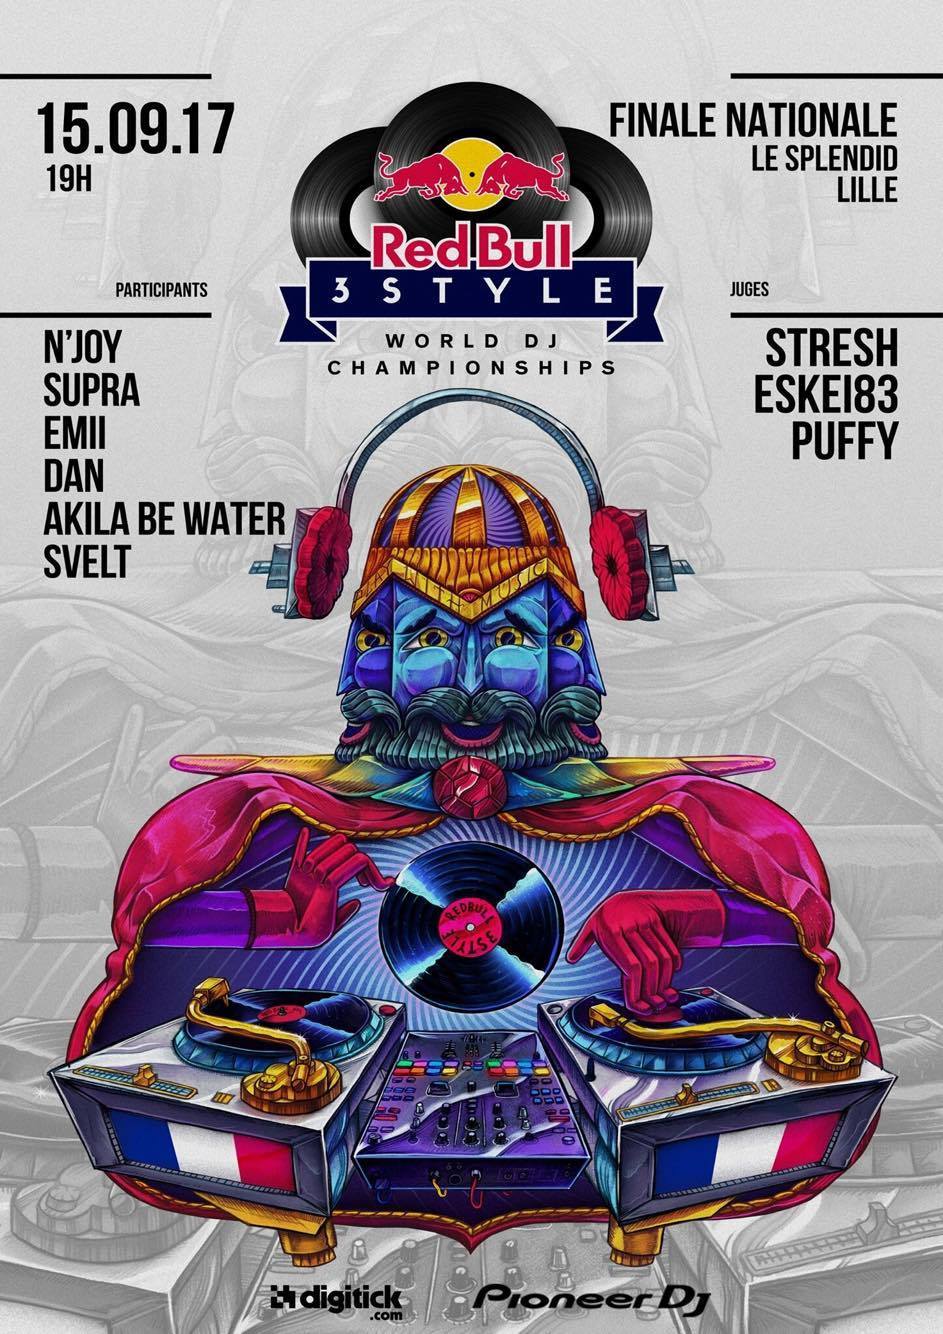 Red Bull 3style